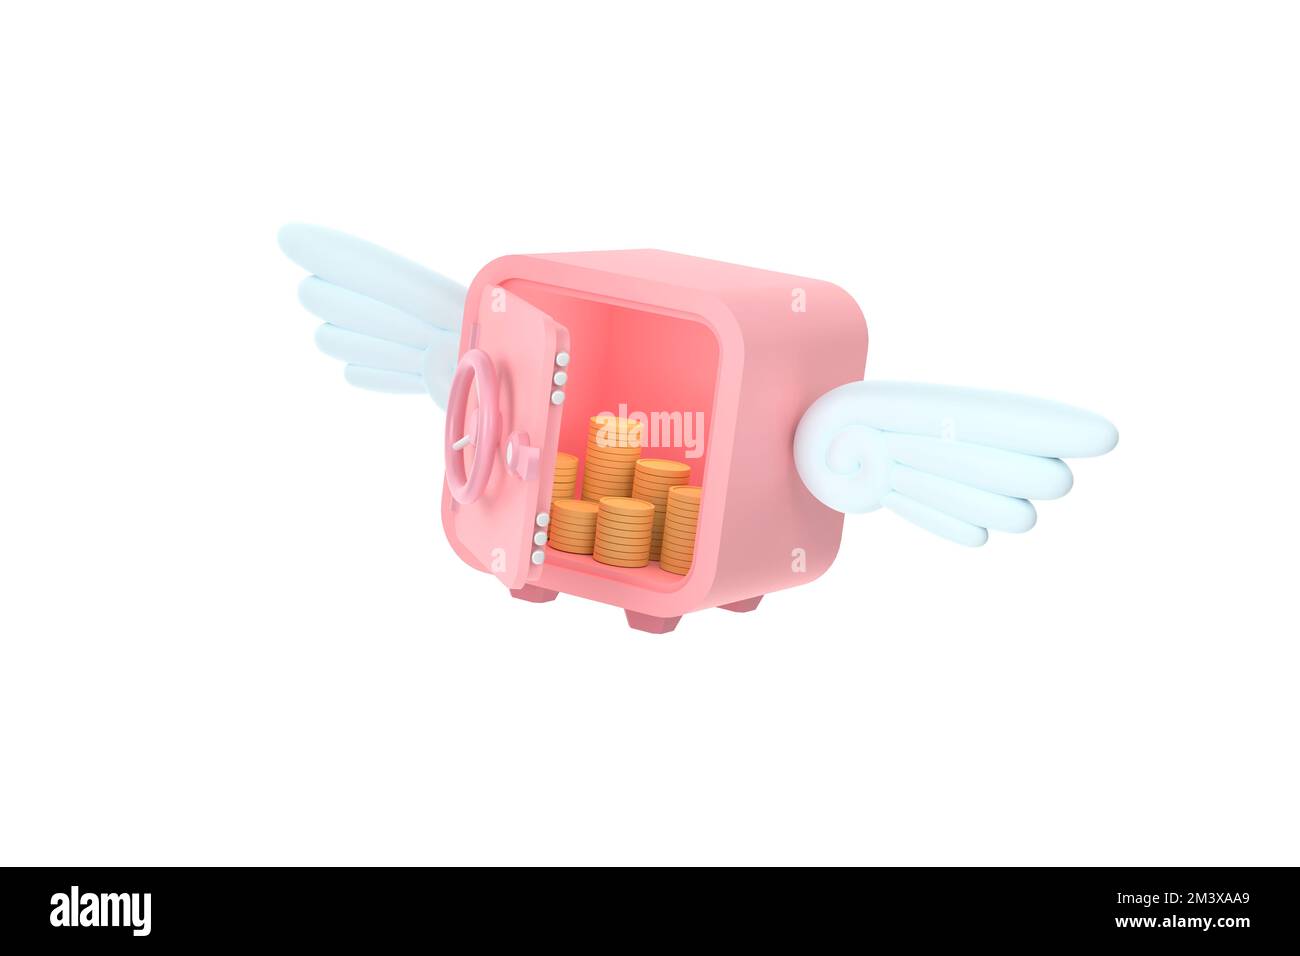 3D. A safety deposit box with flying wings is a symbol of financial freedom. Stock Photo